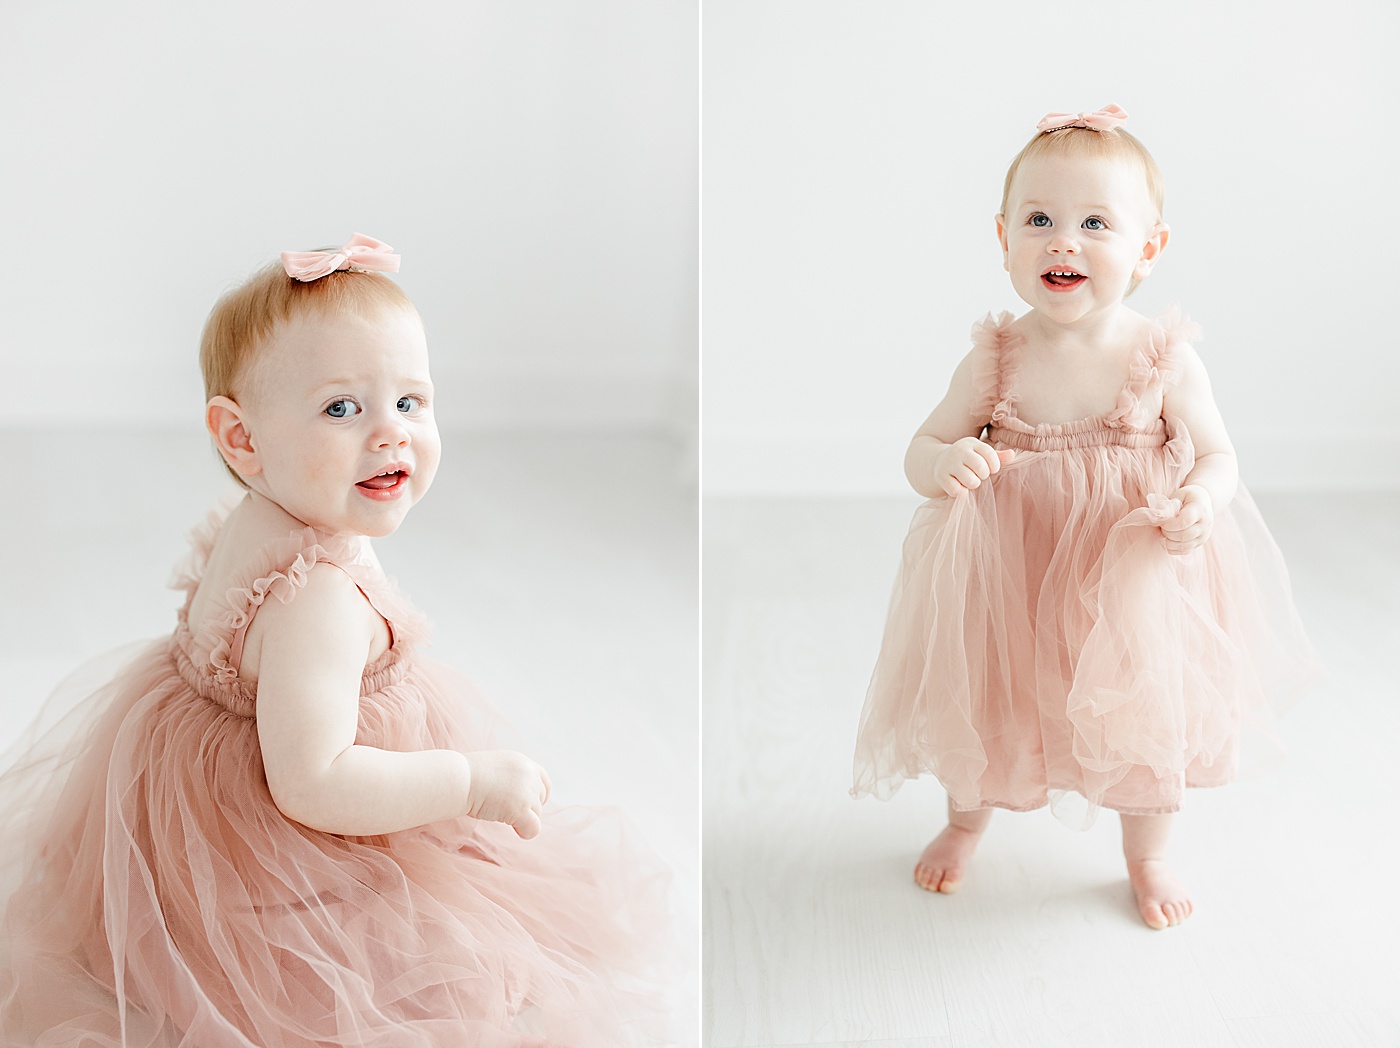 One year old photoshoot in studio in Westport, CT with Kristin Wood Photography.